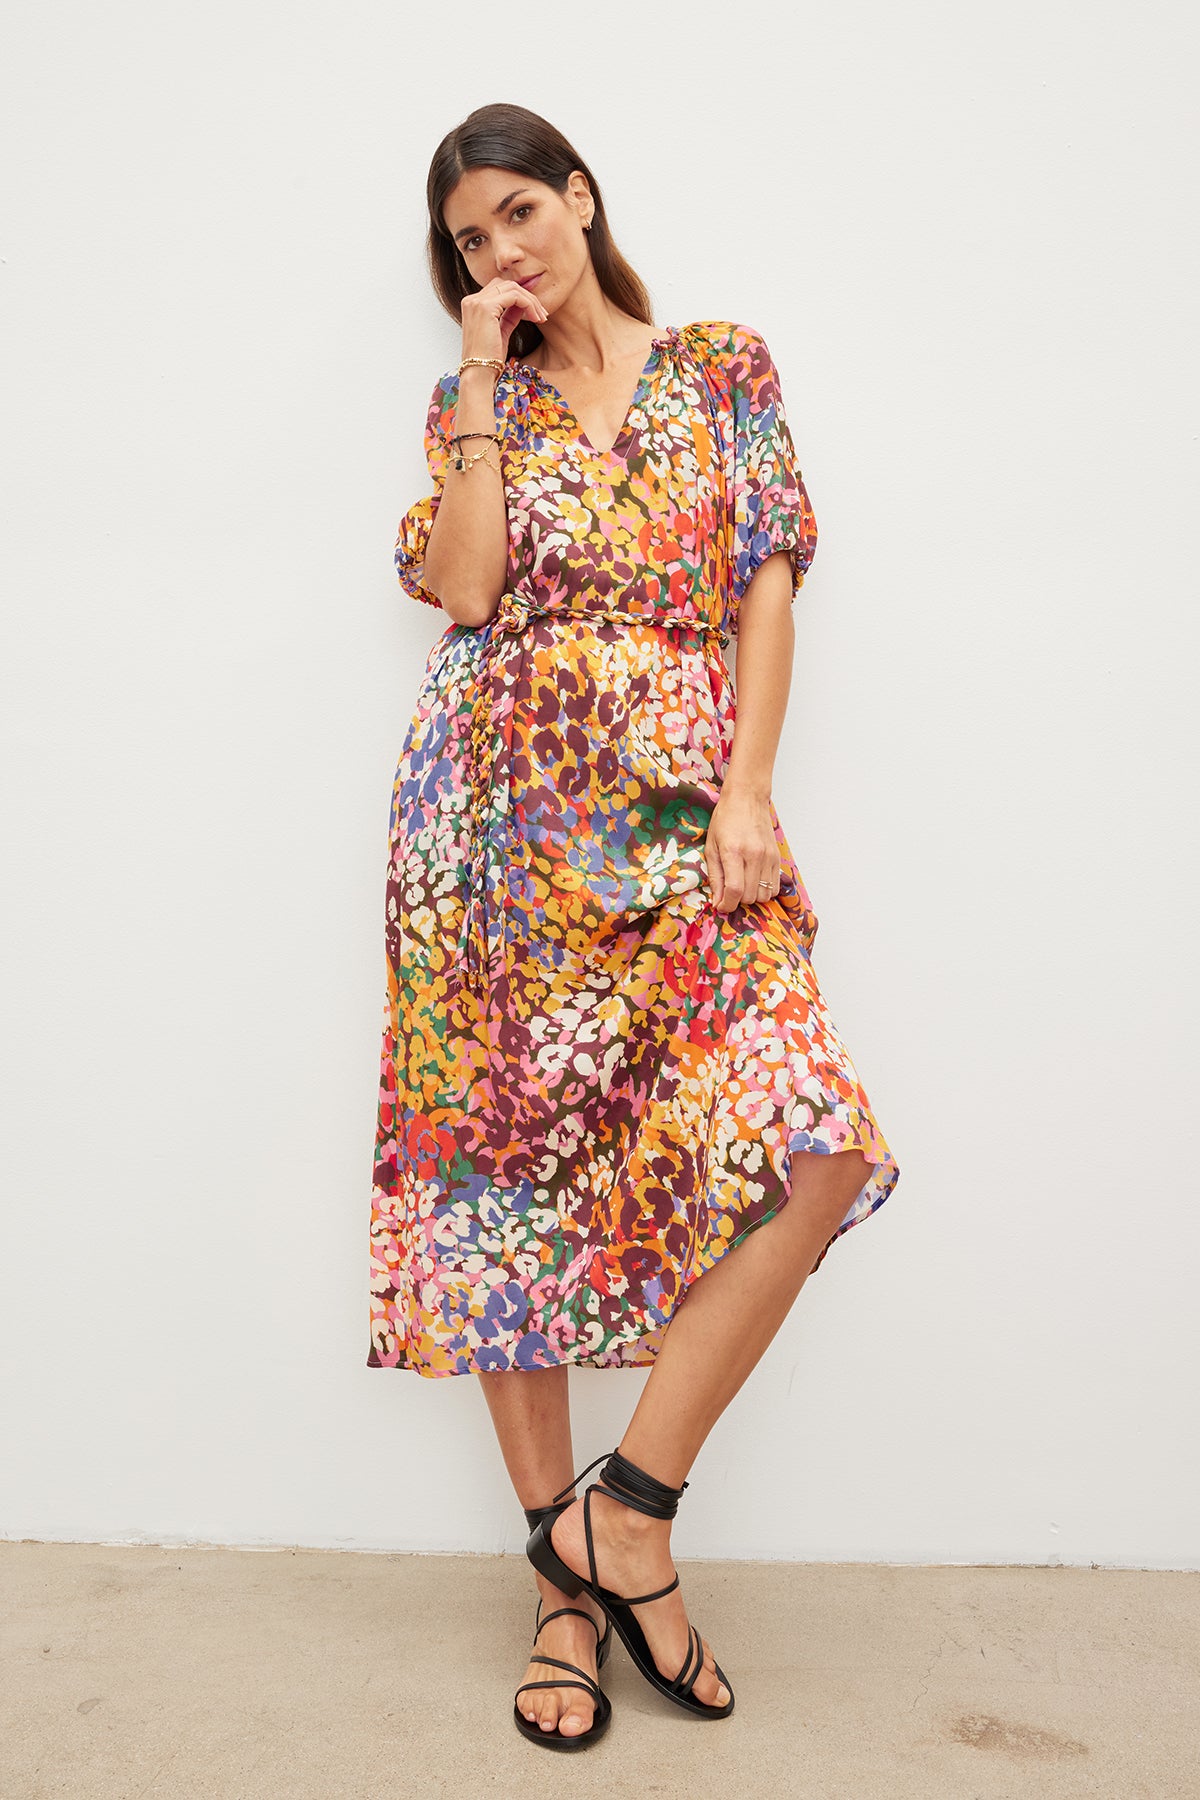 Woman in a CAROL PRINTED BOHO DRESS by Velvet by Graham & Spencer and black sandals, standing against a white background, gently touching her face while looking at the camera.-36691400523969